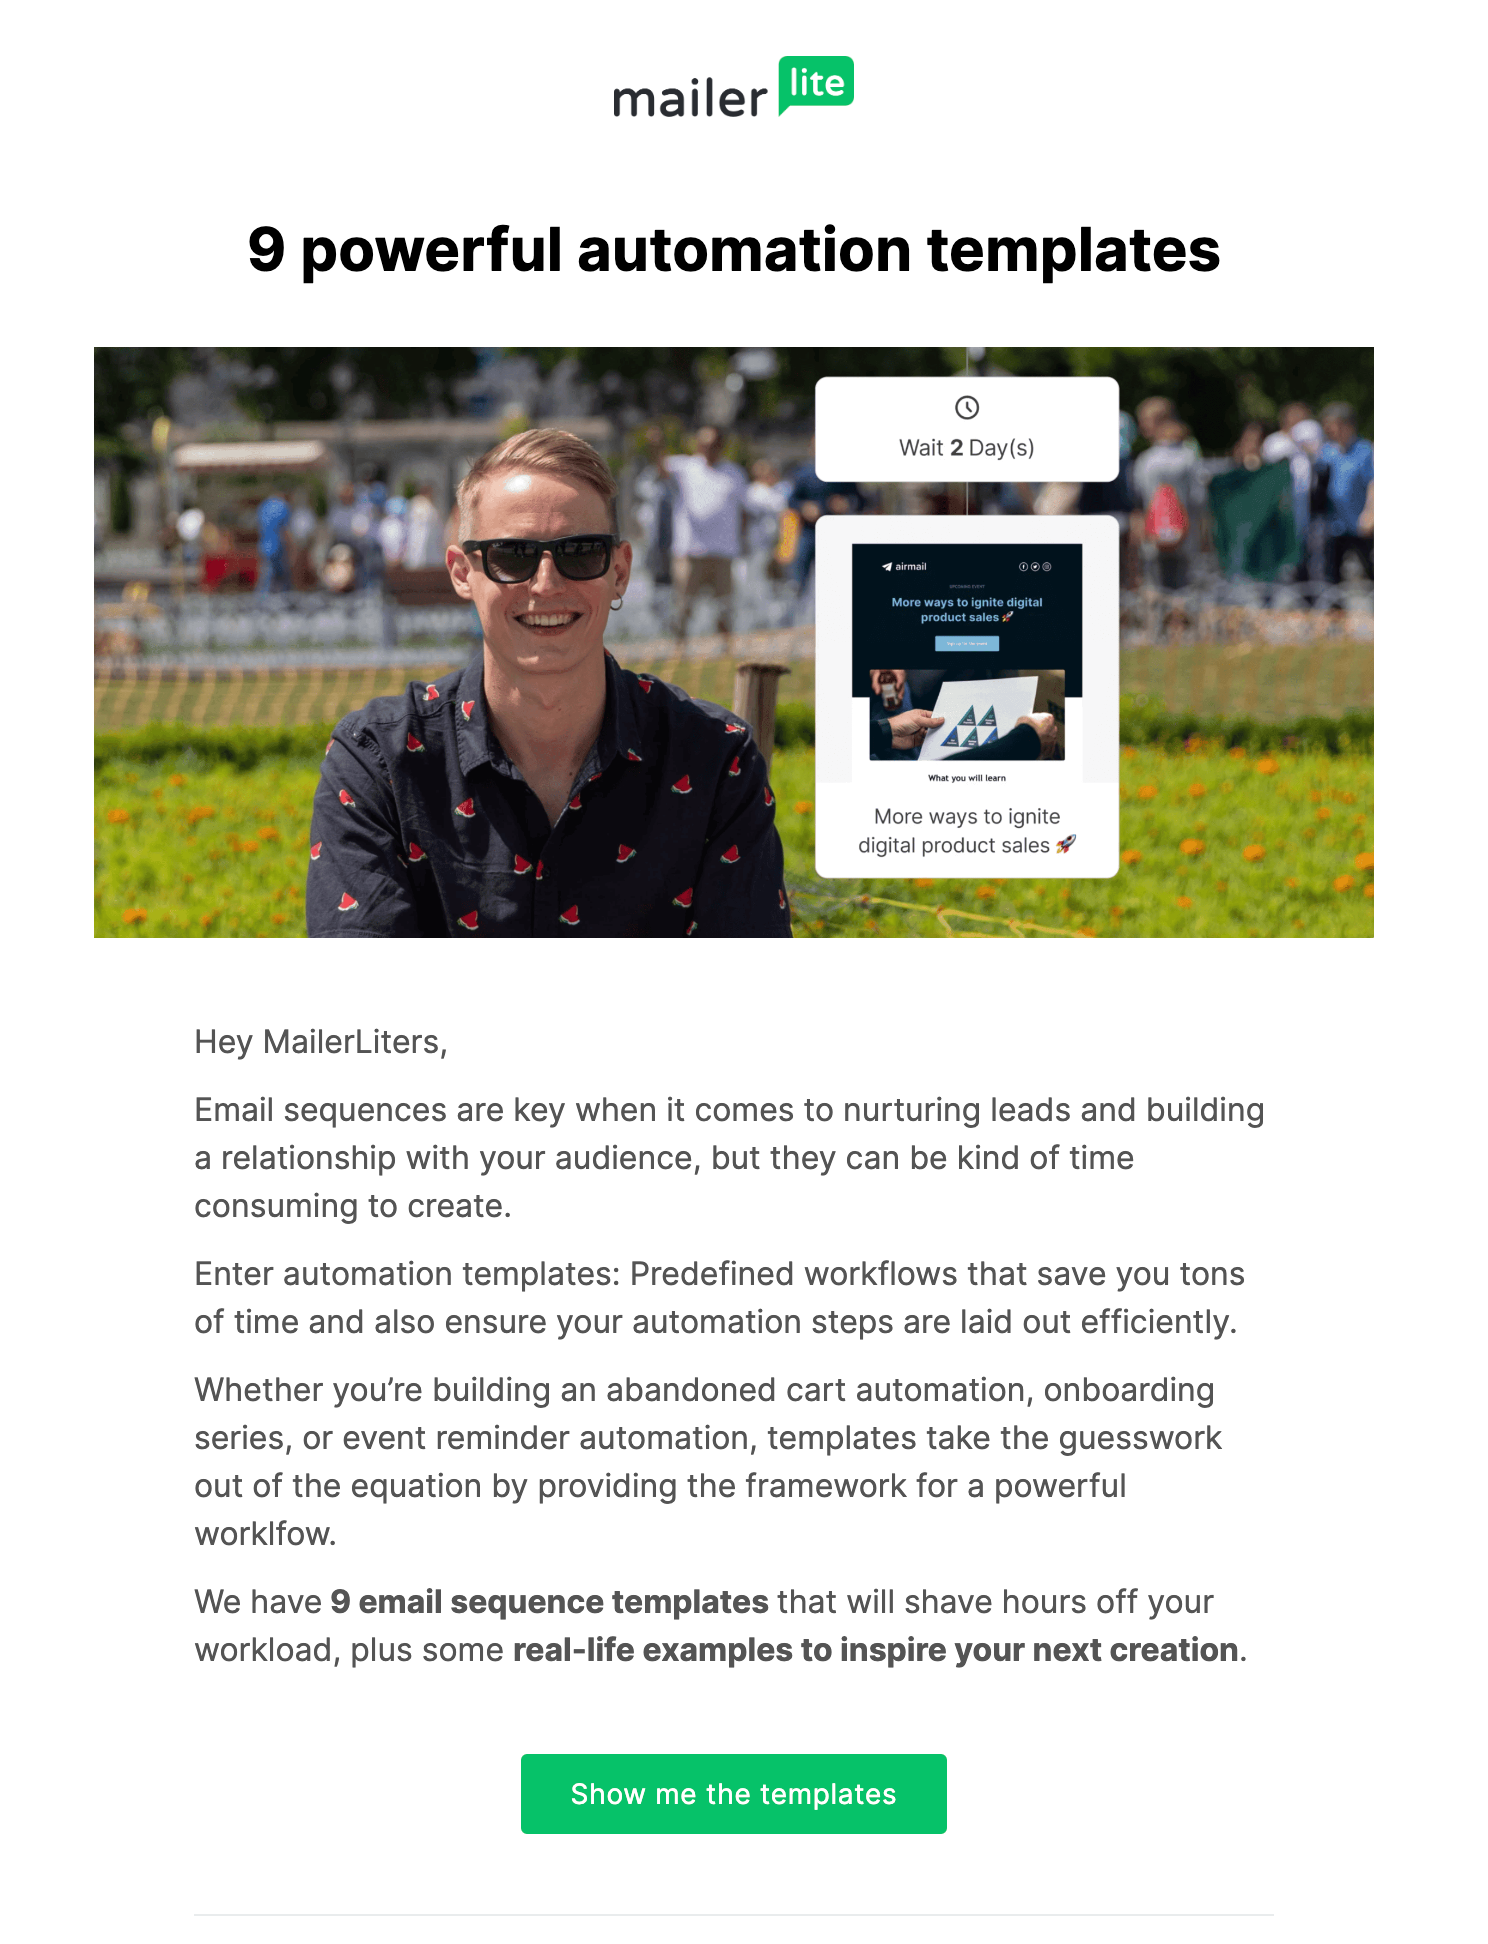 Email containing a link to automation templates